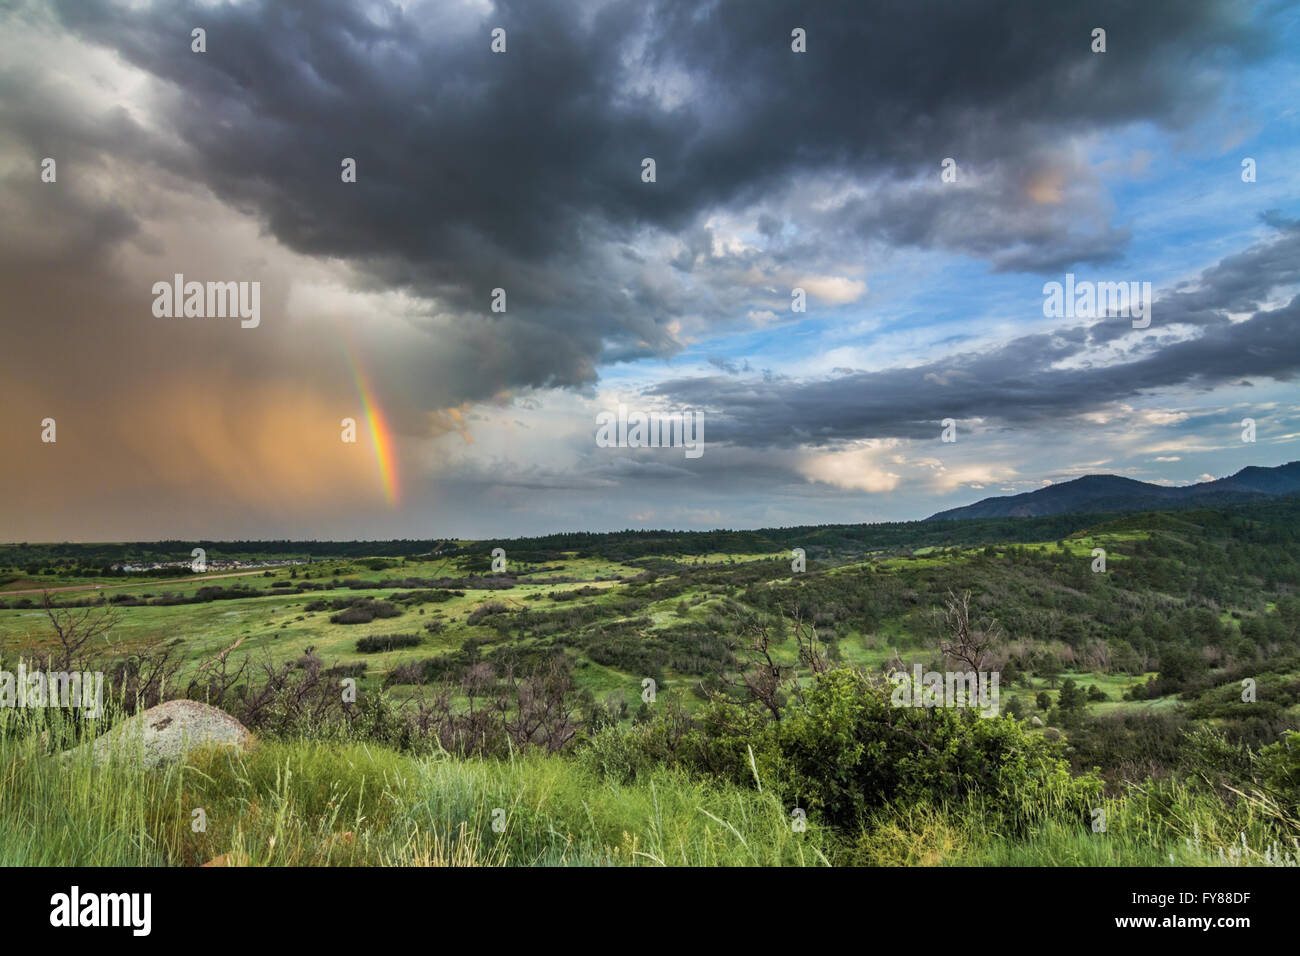 A passing storm leaves a rainbow over the foothills of the Rocky Mountains at Cheyenne Mountain State Park near Colorado Springs Stock Photo